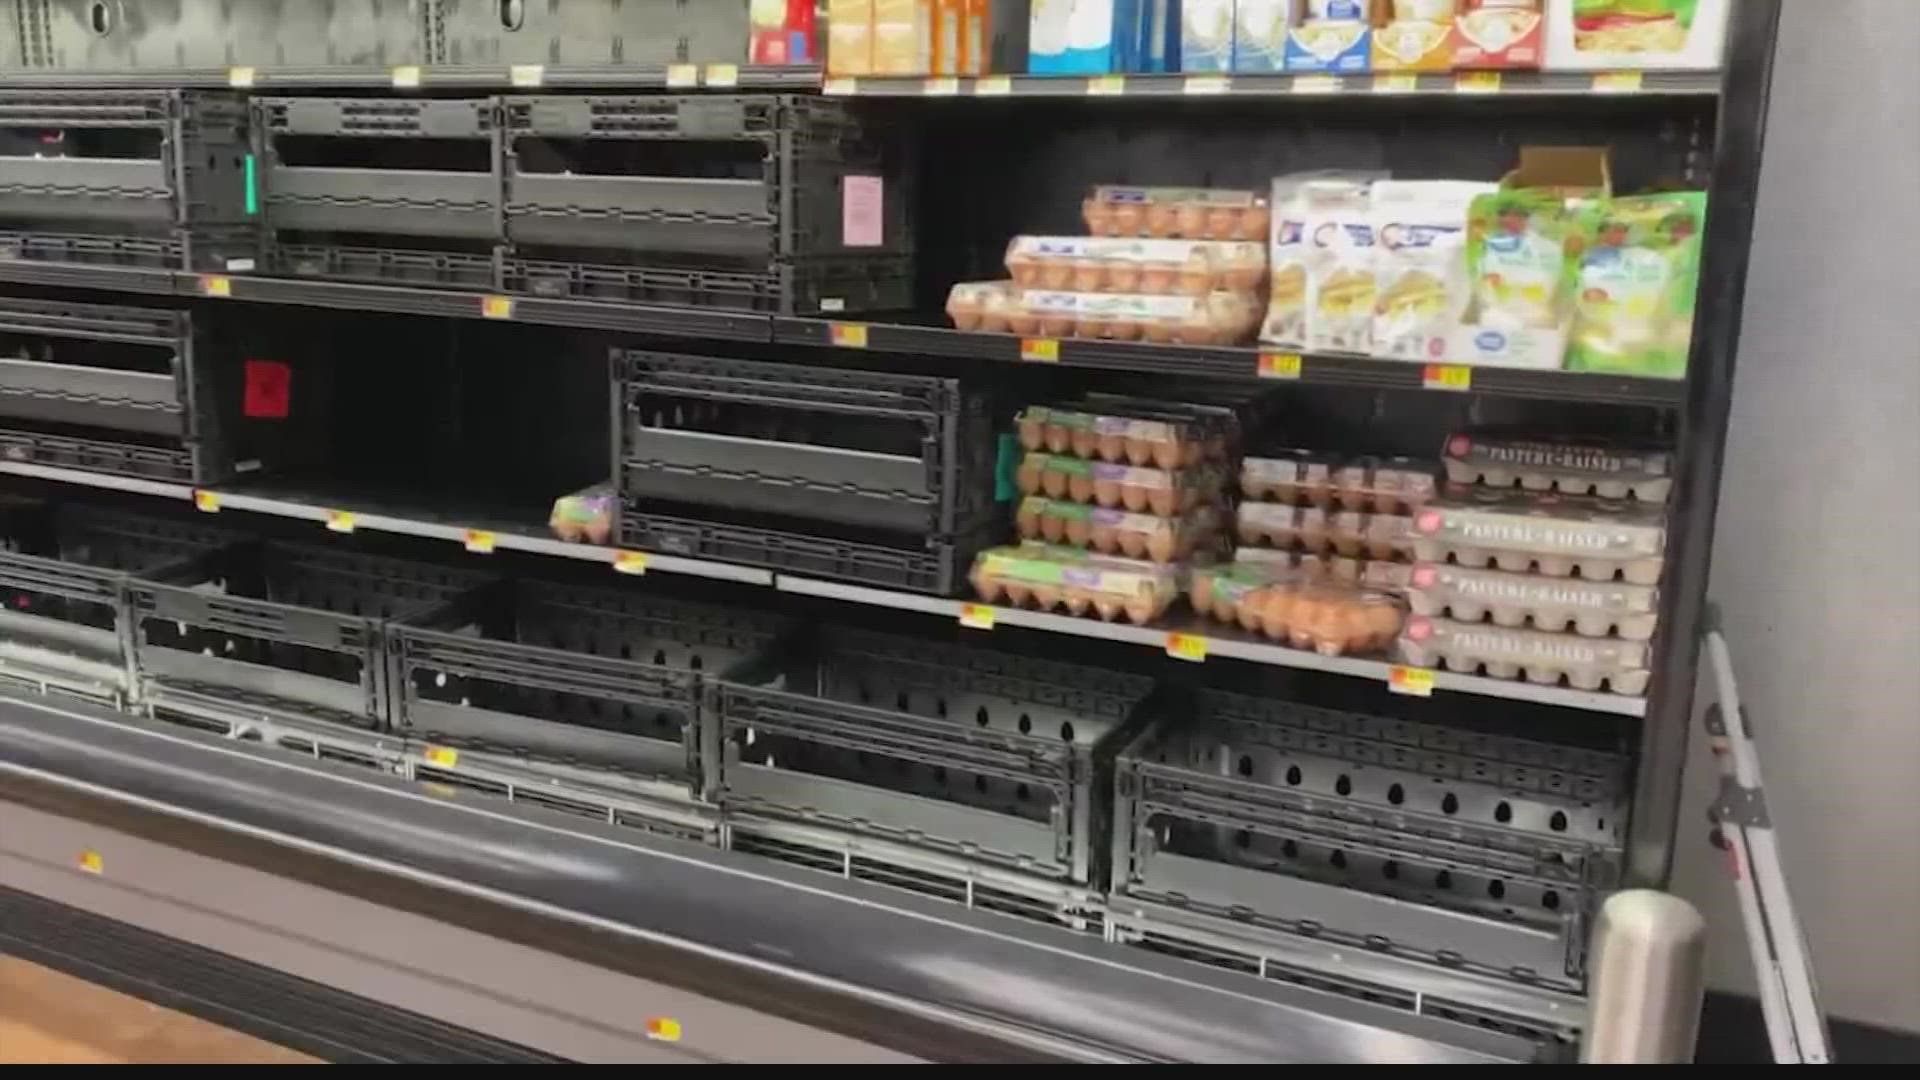 Winter weather emergencies coupled with a COVID surge are leaving some grocery store shelves empty.